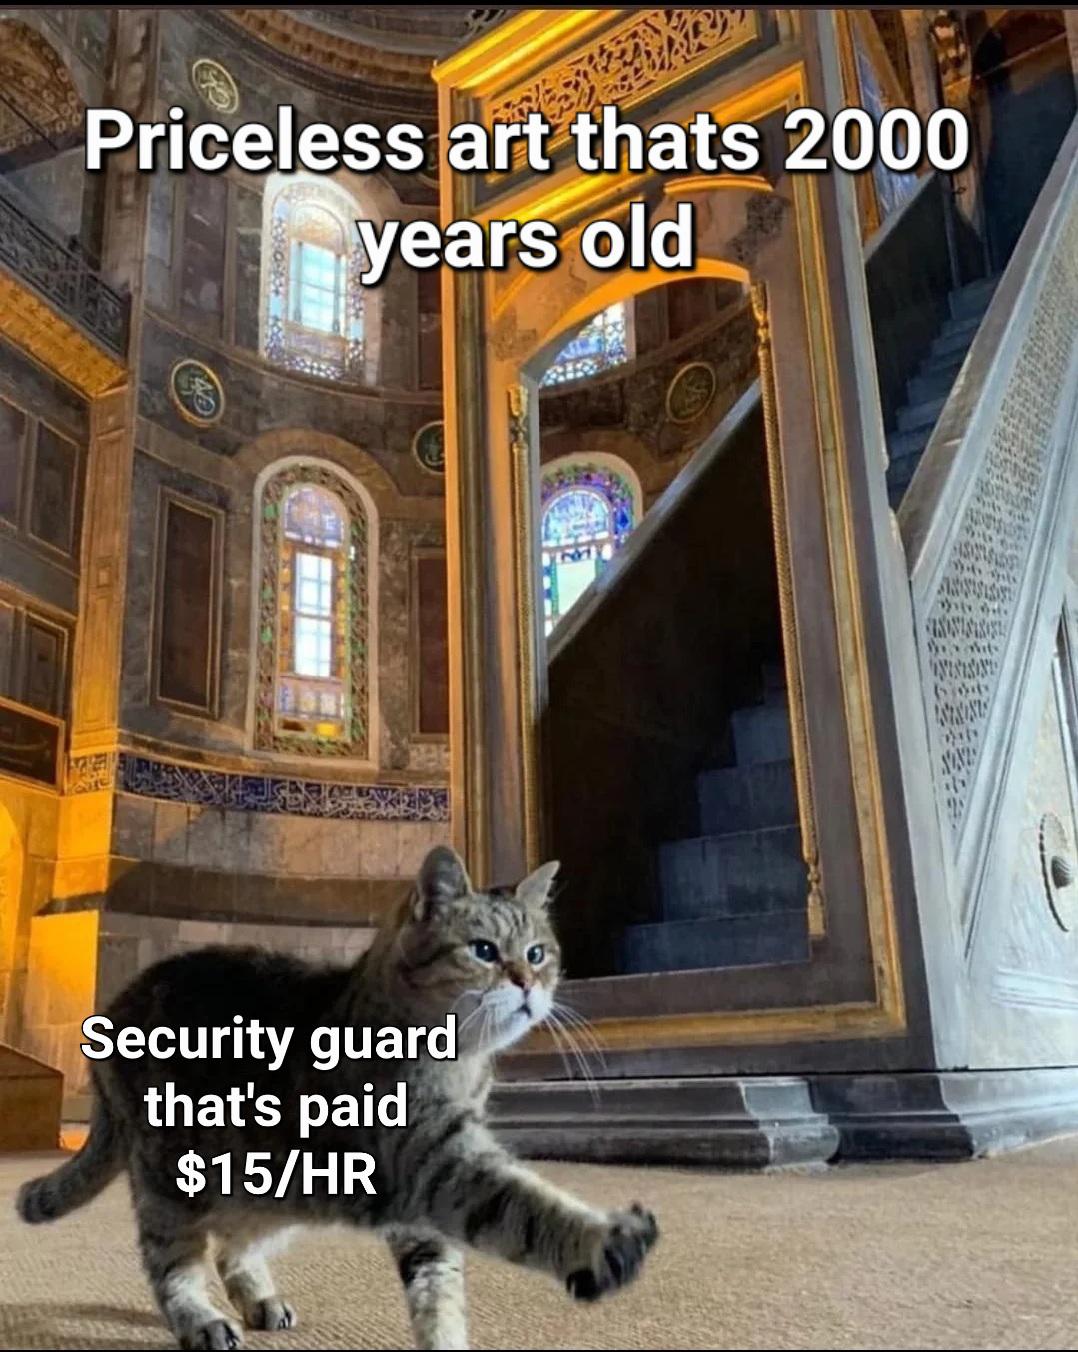 dank memes --  hagia sophia museum - Priceless art thats 2000 years old Security guard that's paid $15Hr Doh le Aisi Die Ninisin 6100 Sinoni Daly None s